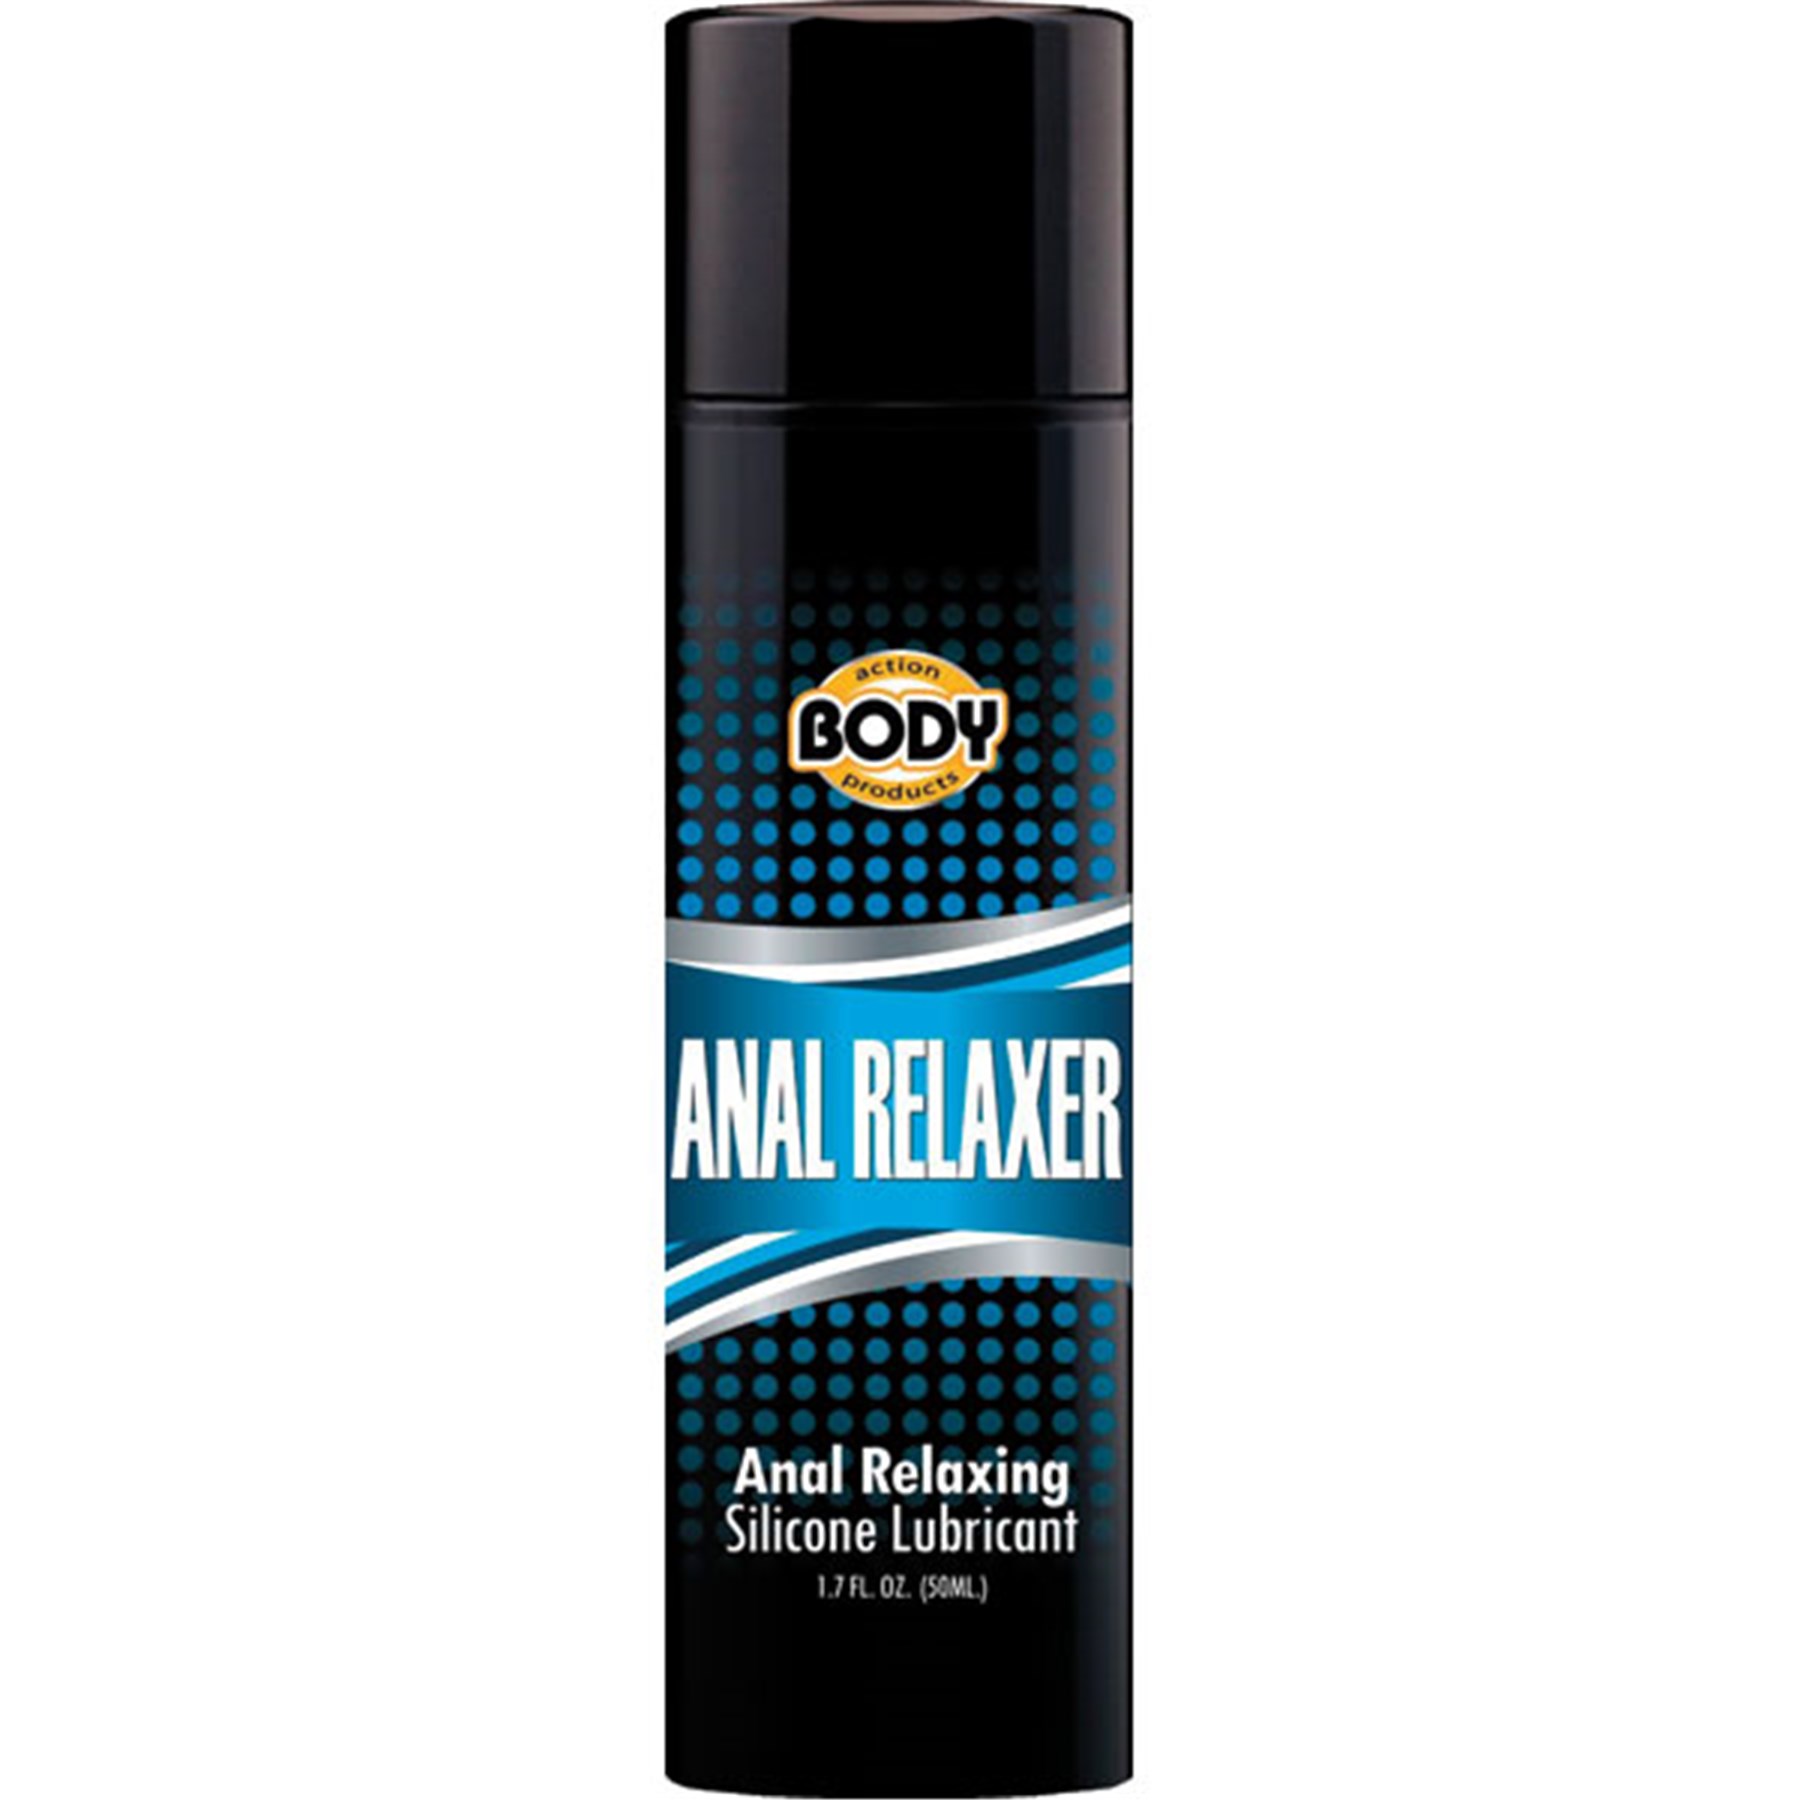 Anal Relaxer Silicone Lube